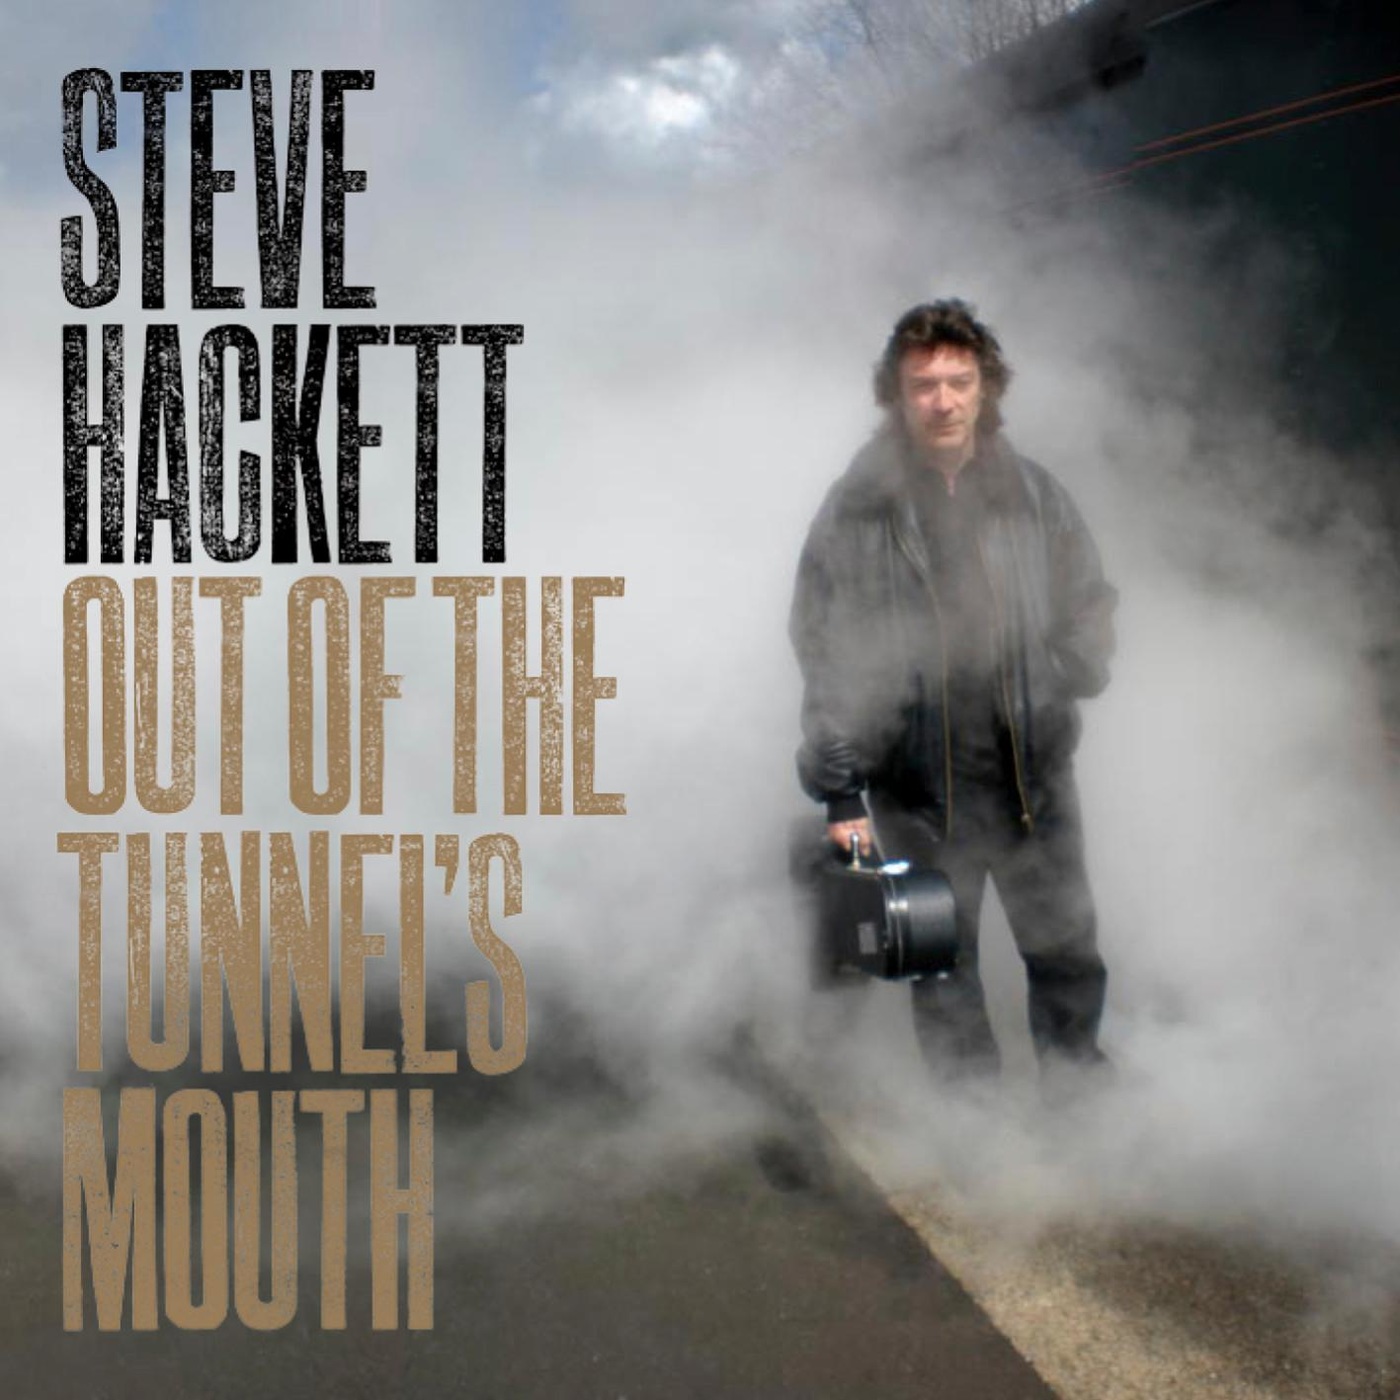 Out Of The Tunnel's Mouth | Steve Hackett image0